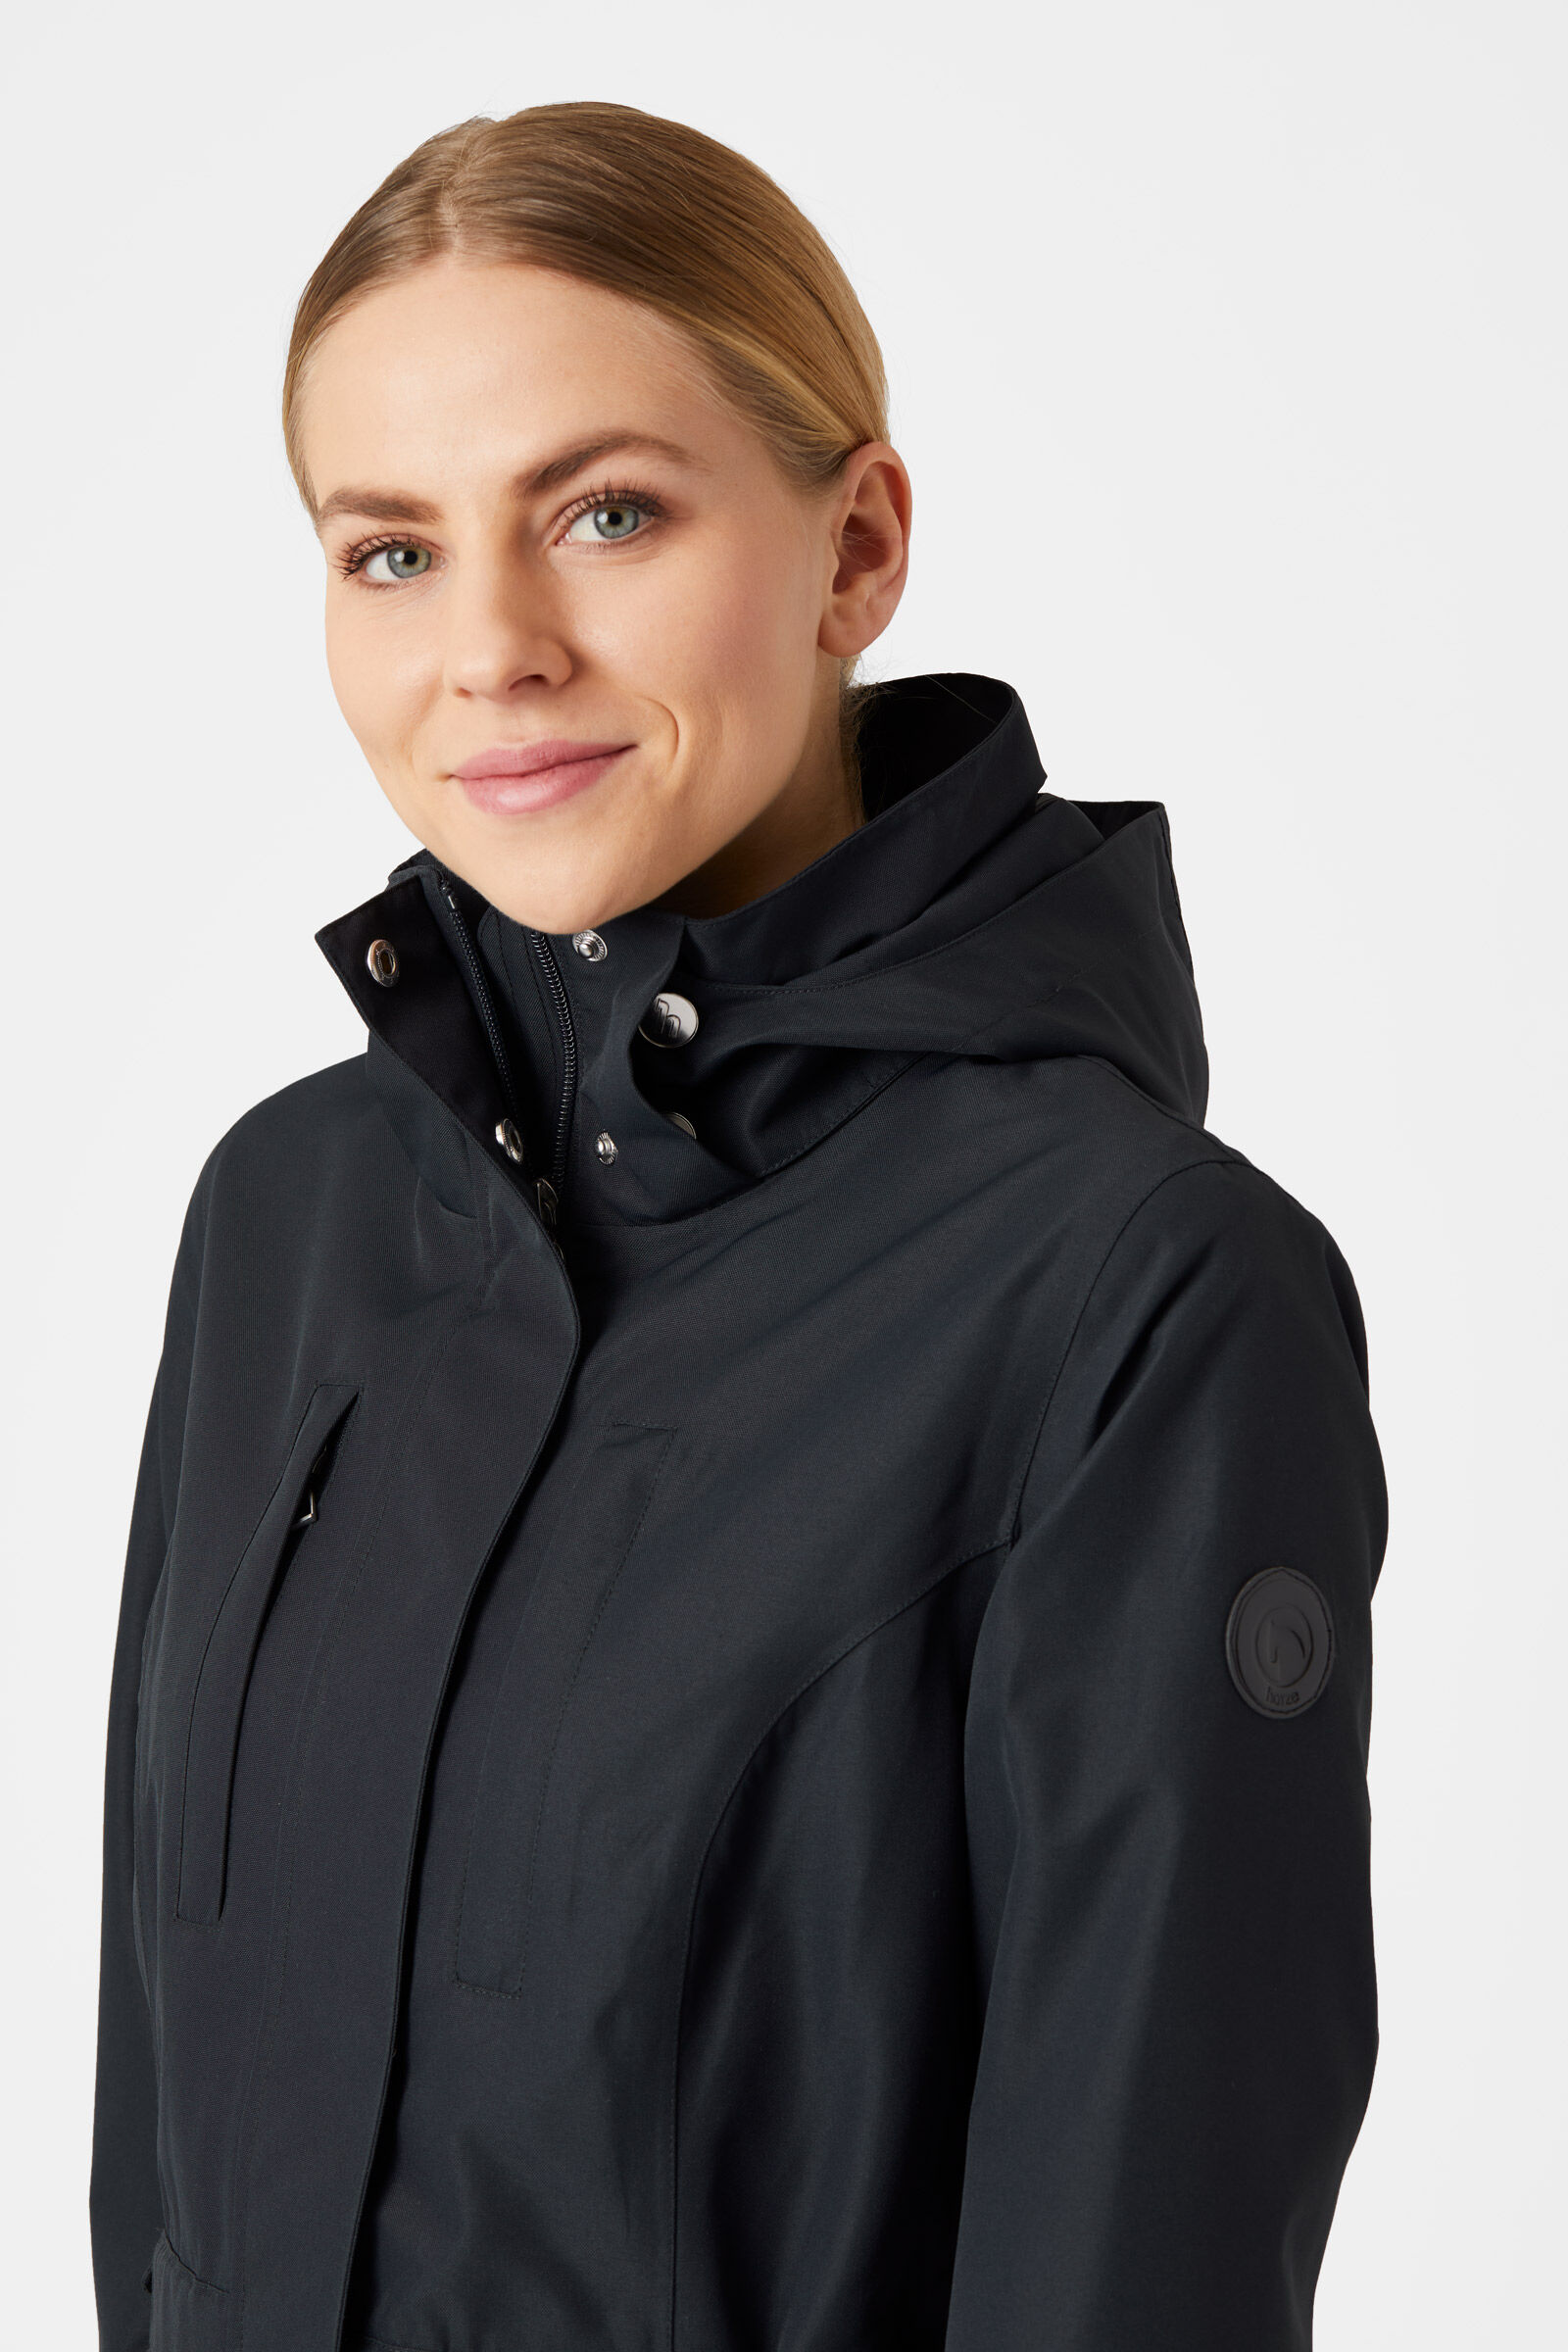 Horze Jadine Waterproof Technical Riding Jacket with Zip in the Back 